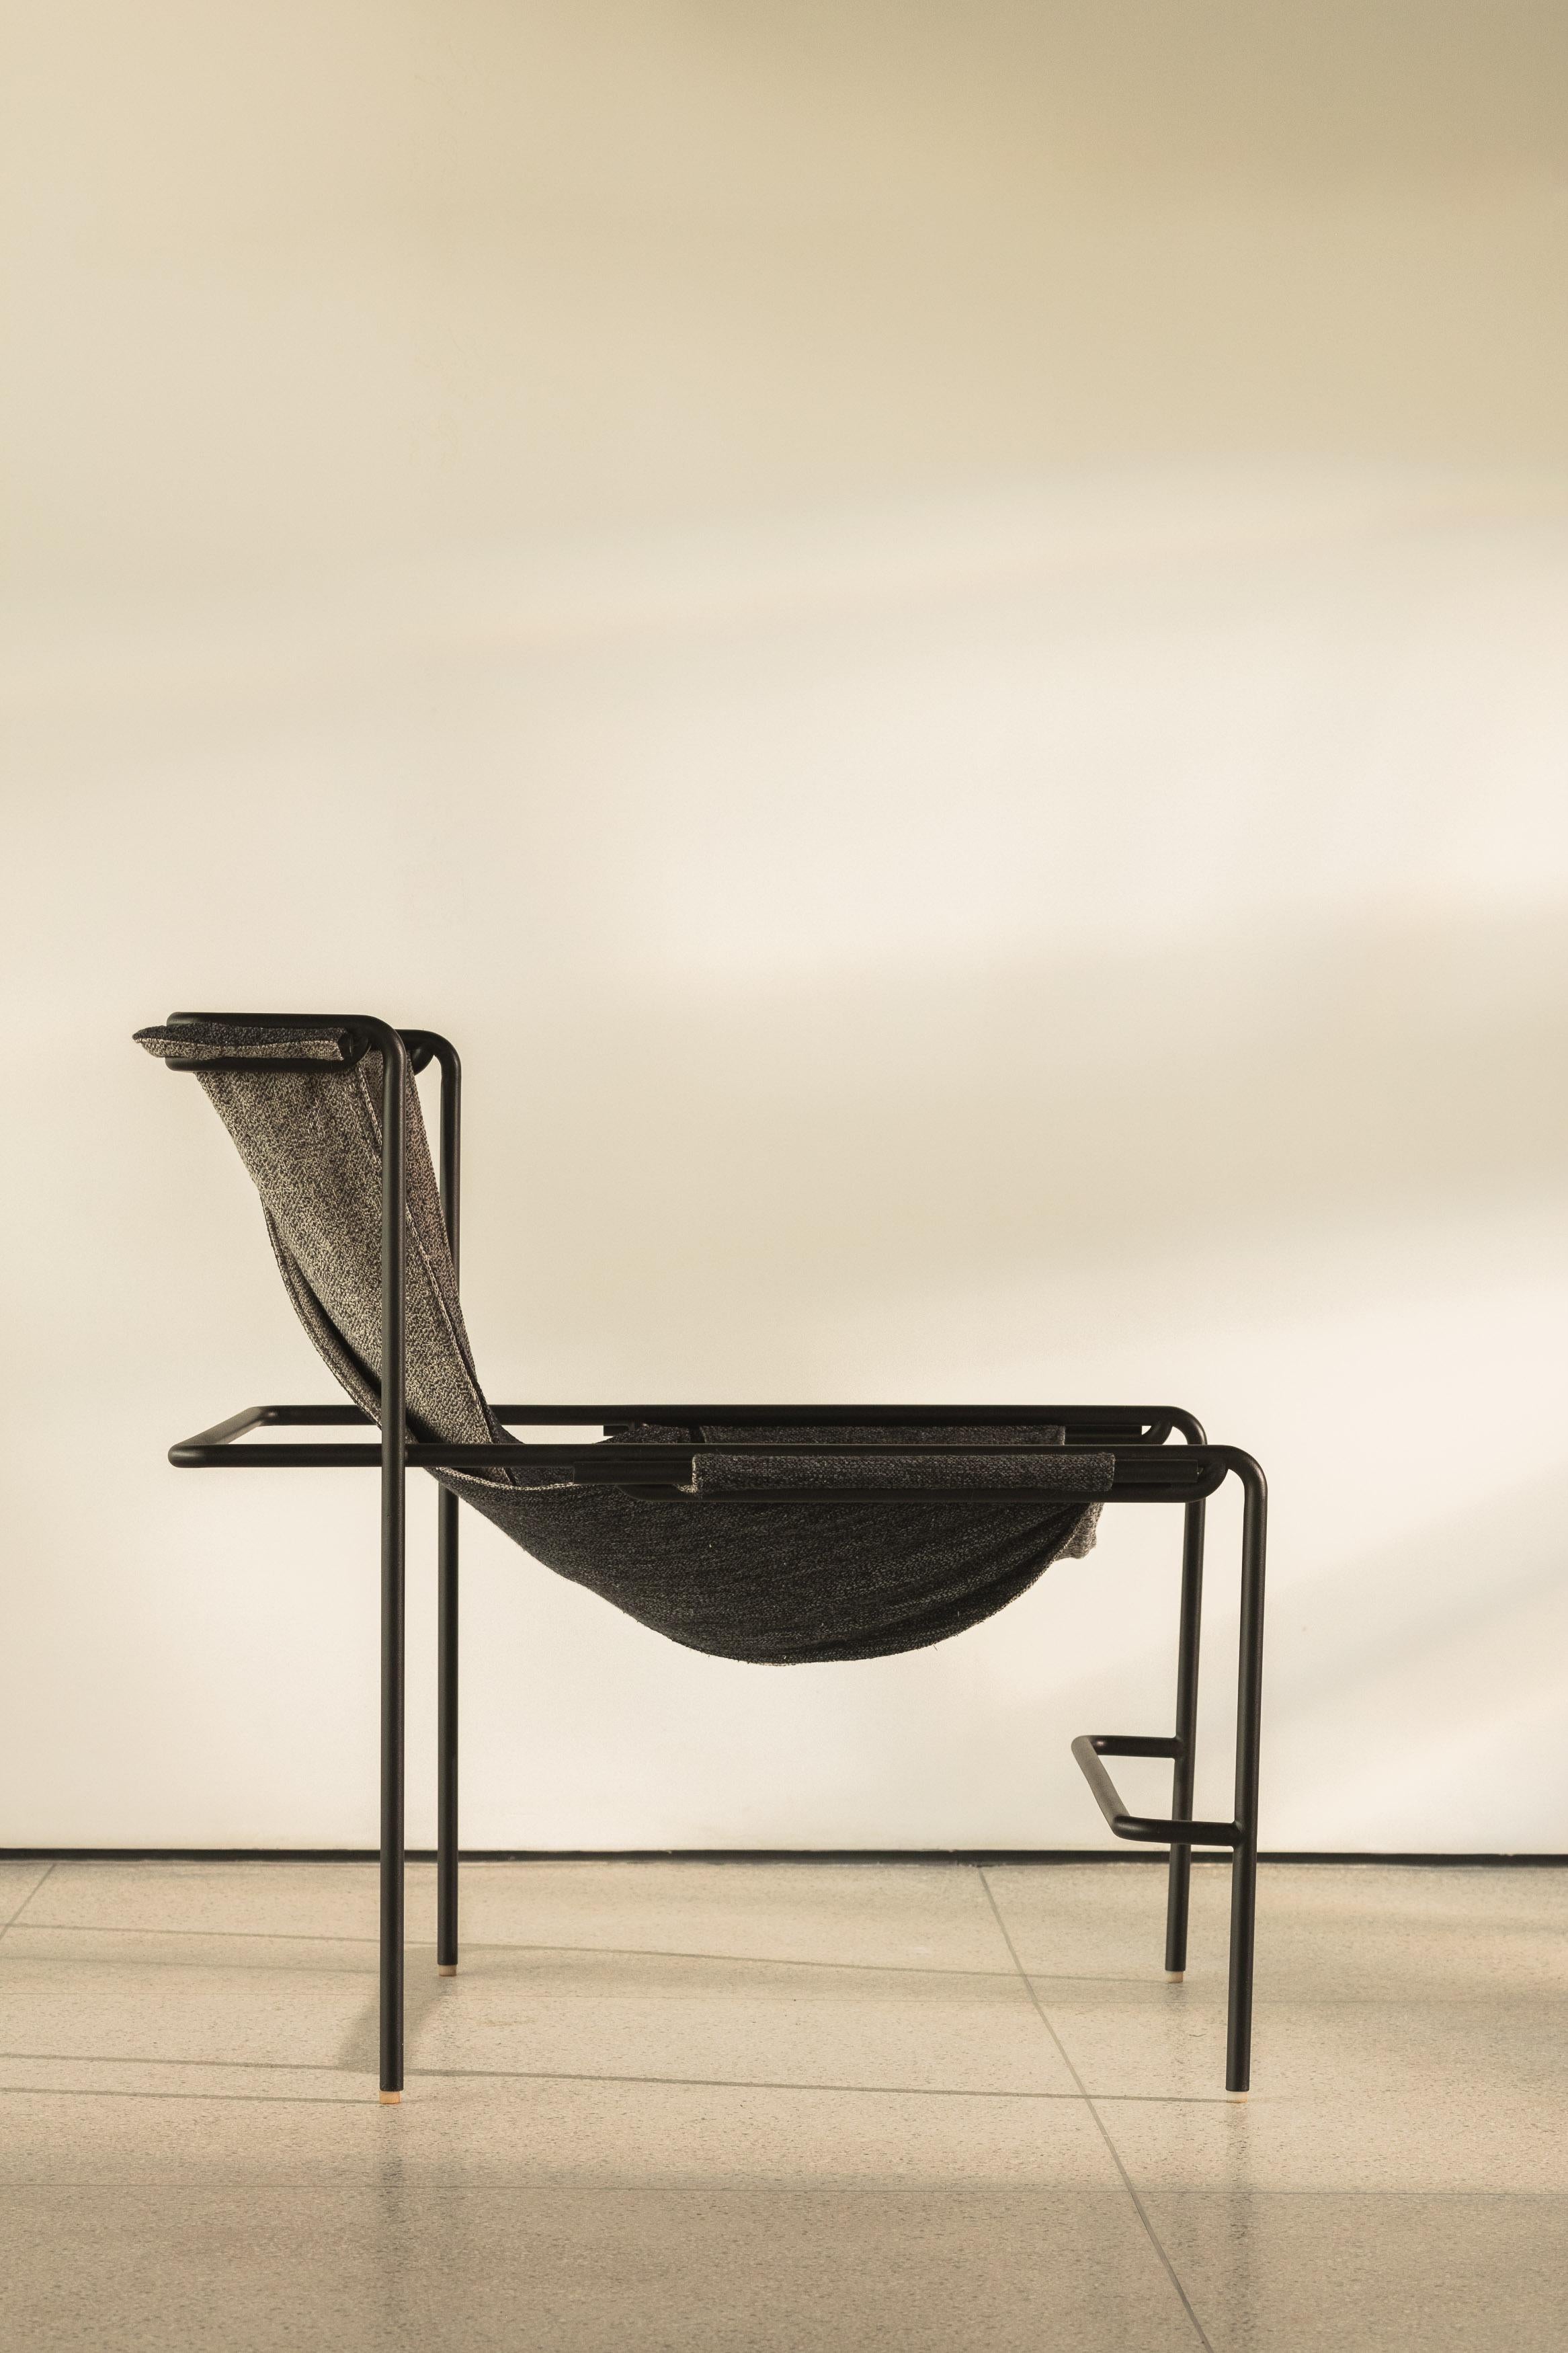 The Padiola lounge chair pays homage to textiles. Its structure draws inspiration from modern masters and is specifically designed as a framework for displaying various textiles.

These textiles can be hung in a manner that showcases both sides of